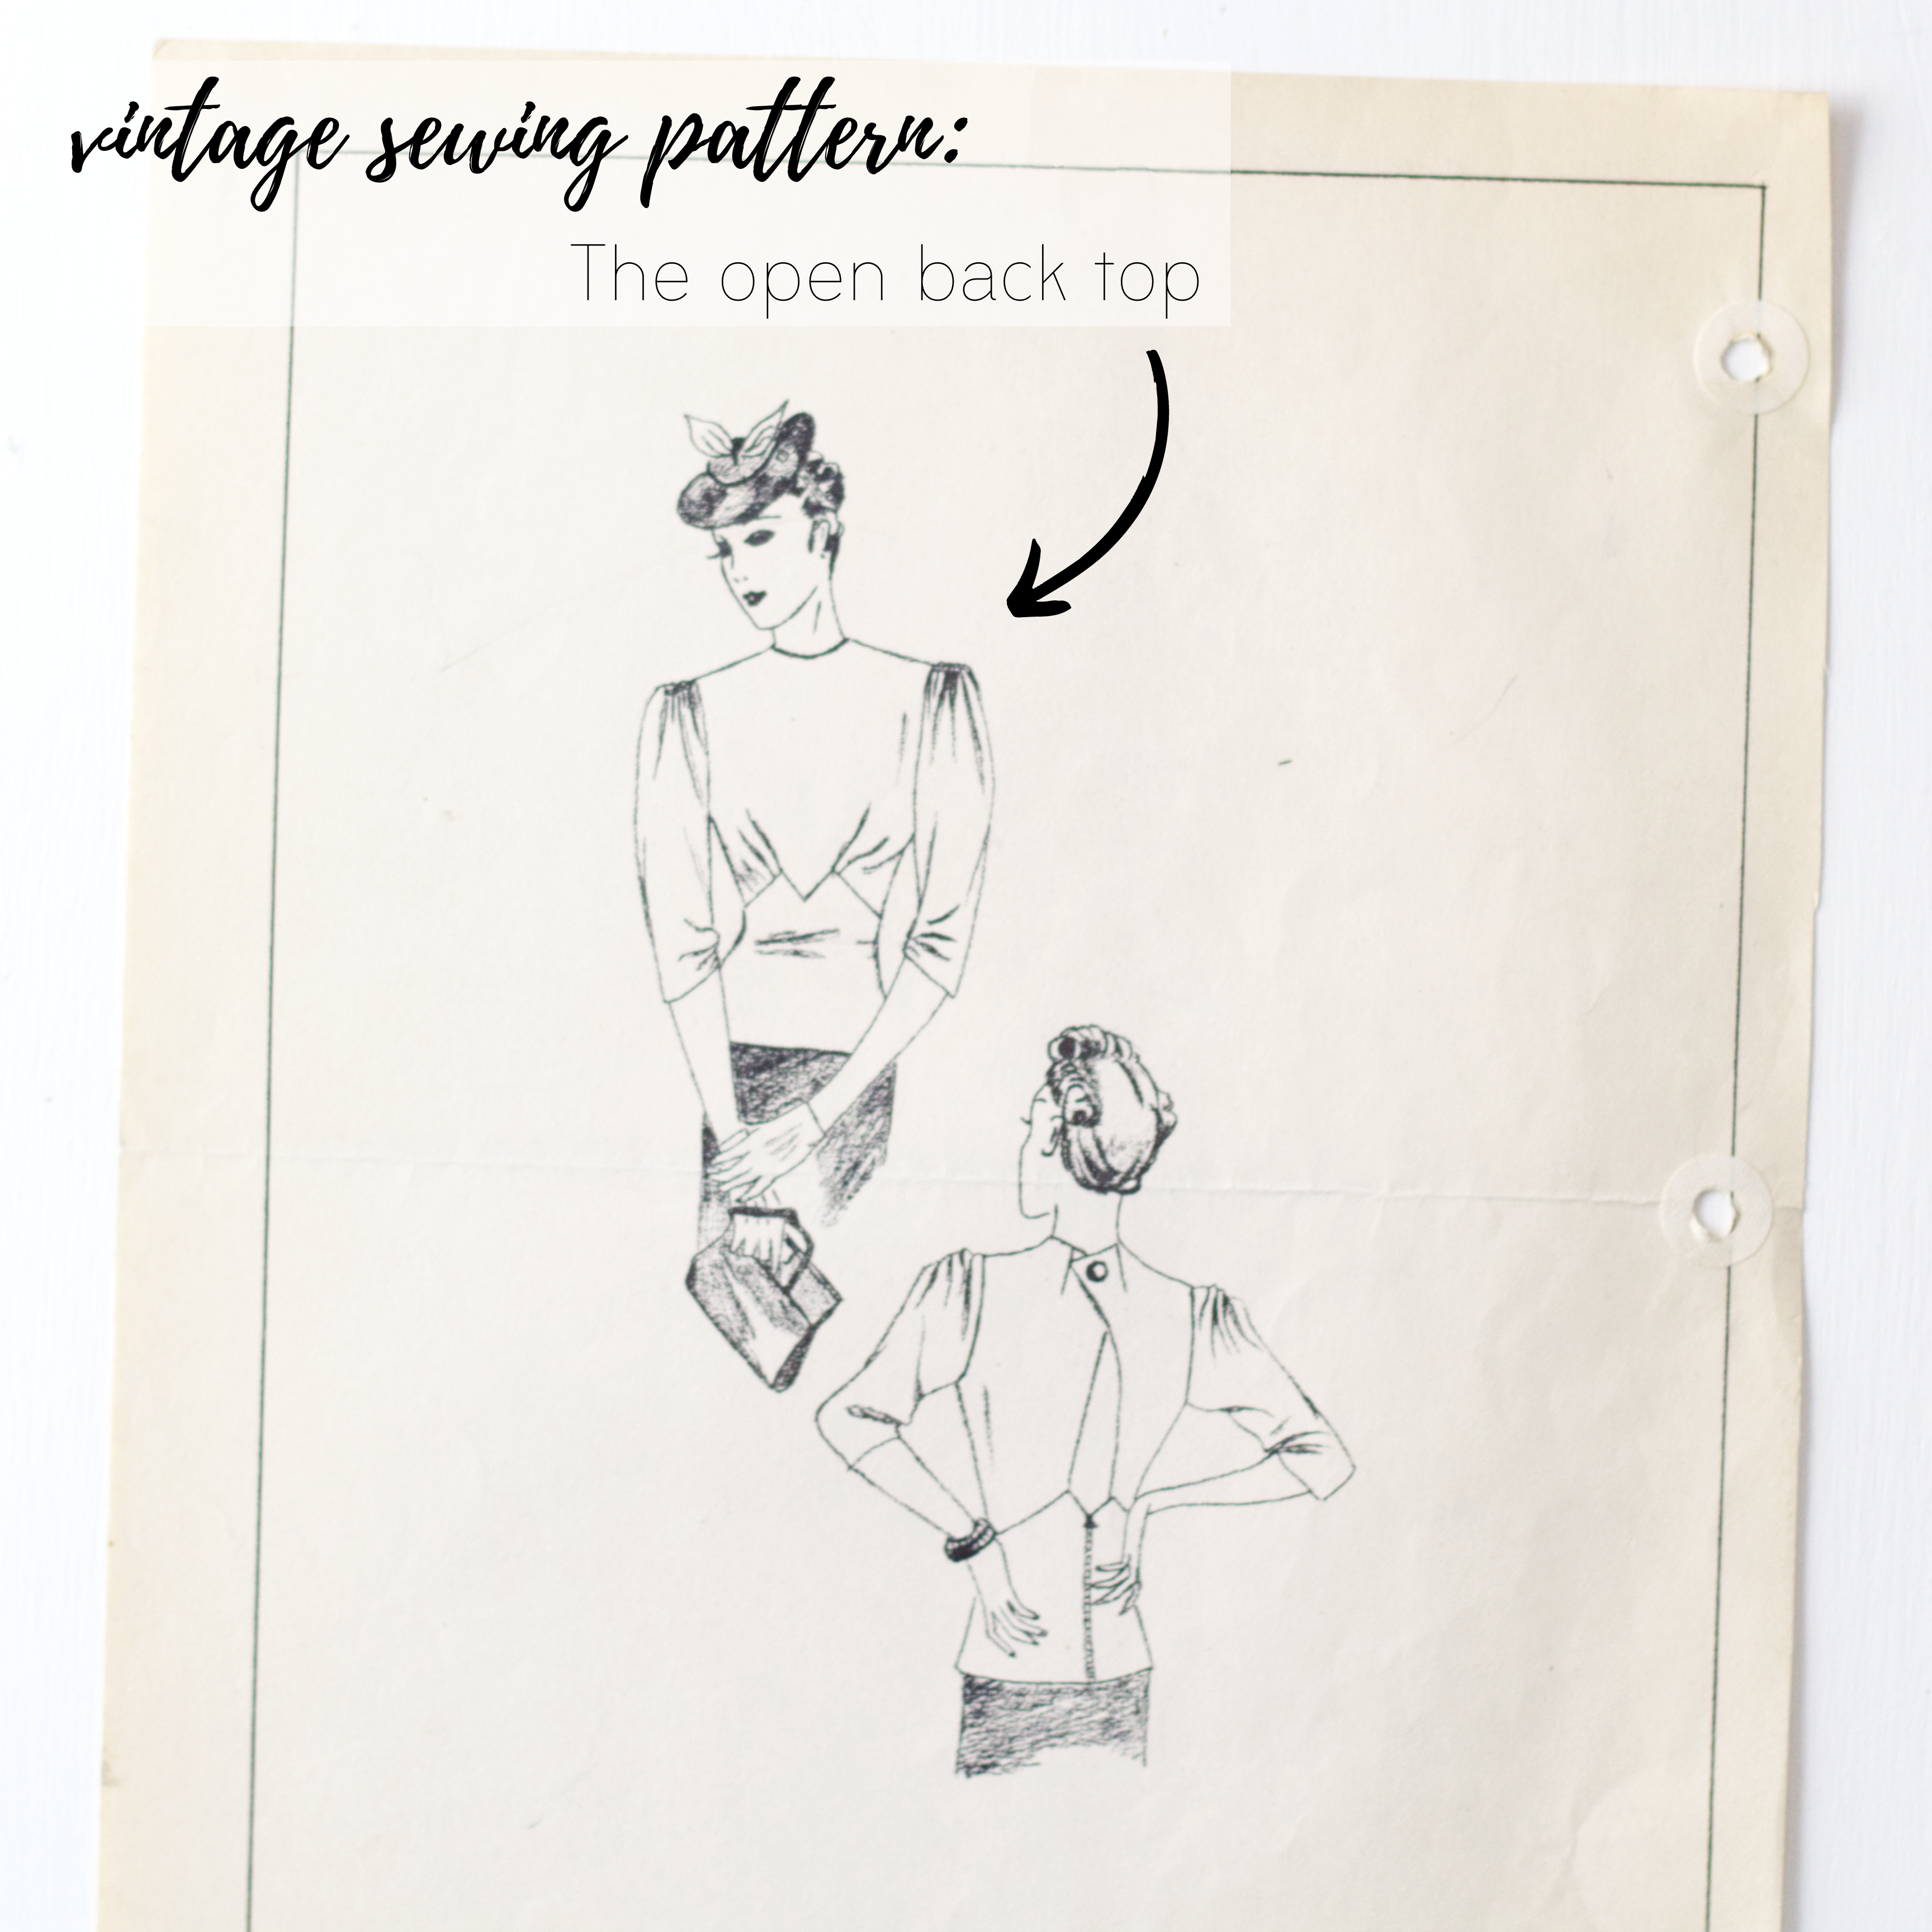 Vintage sewing pattern inspiration: The open back top